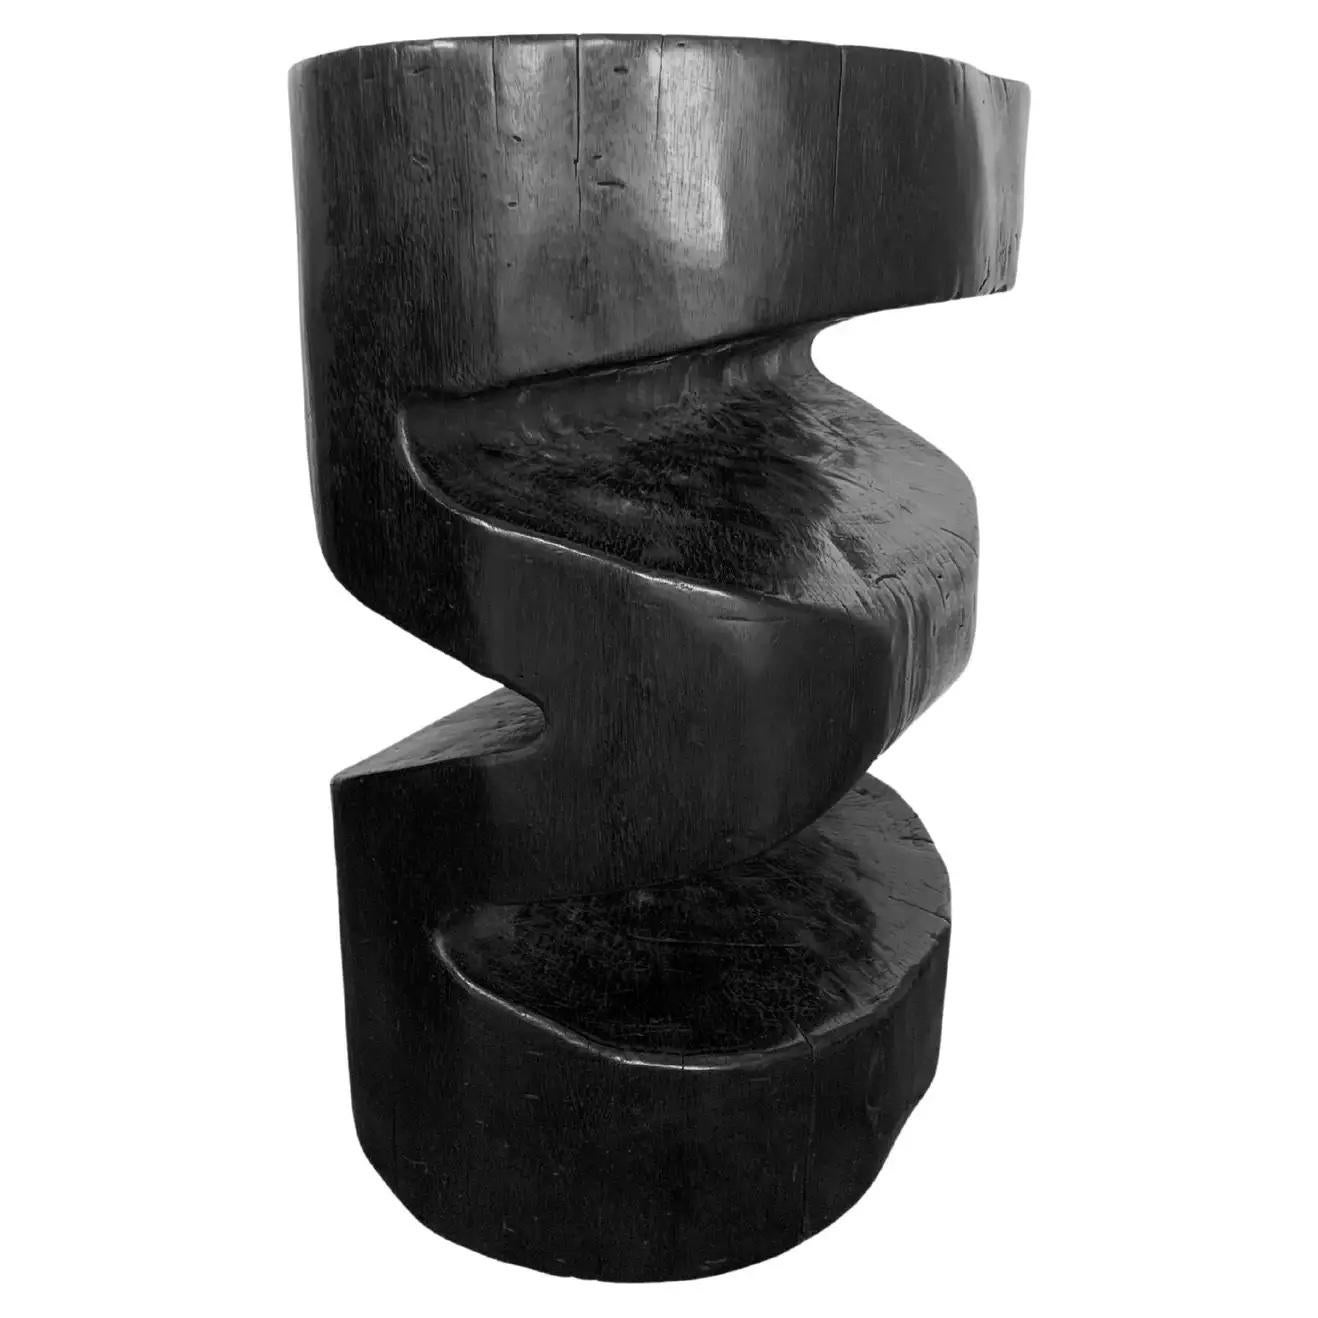 A wonderfully sculptural side table with a mix of wood textures and shades. It features a waved design. A uniquely sculptural and versatile piece, this chair was crafted from a single block of mango wood and has a smooth texture. Meticulously